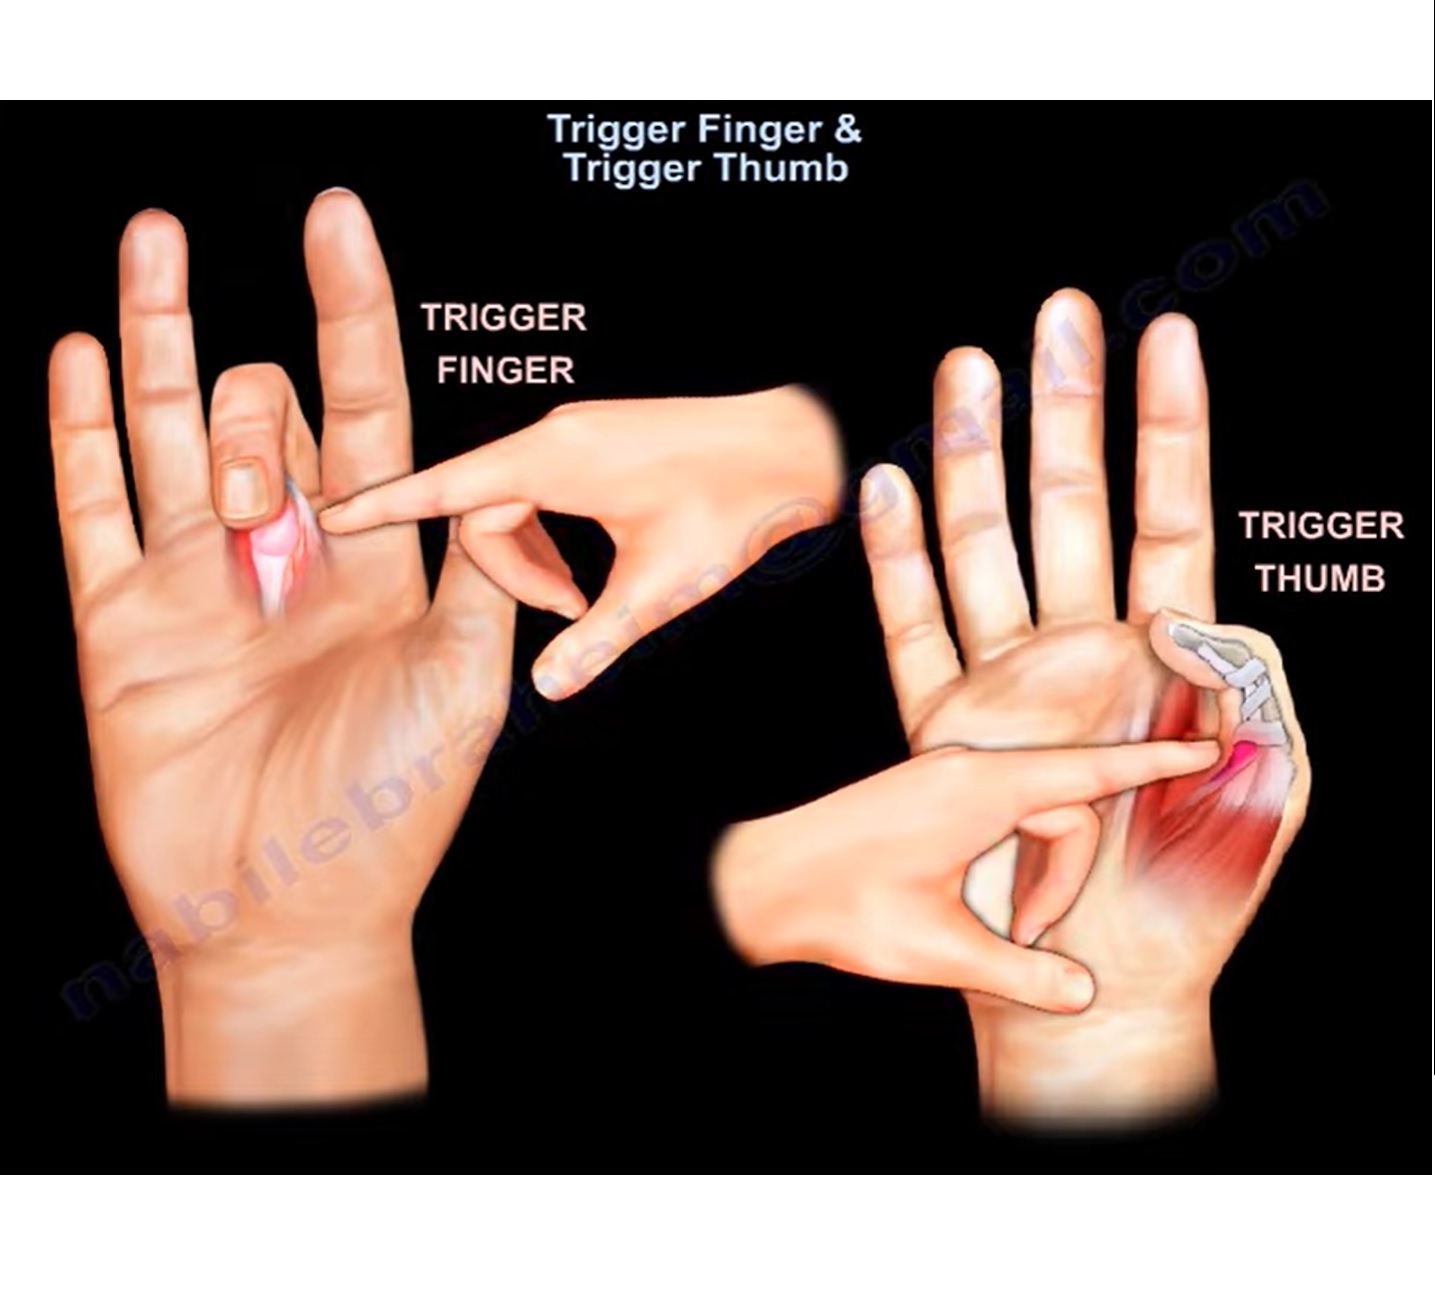 Treatment Options for Trigger Finger and Trigger Thumb